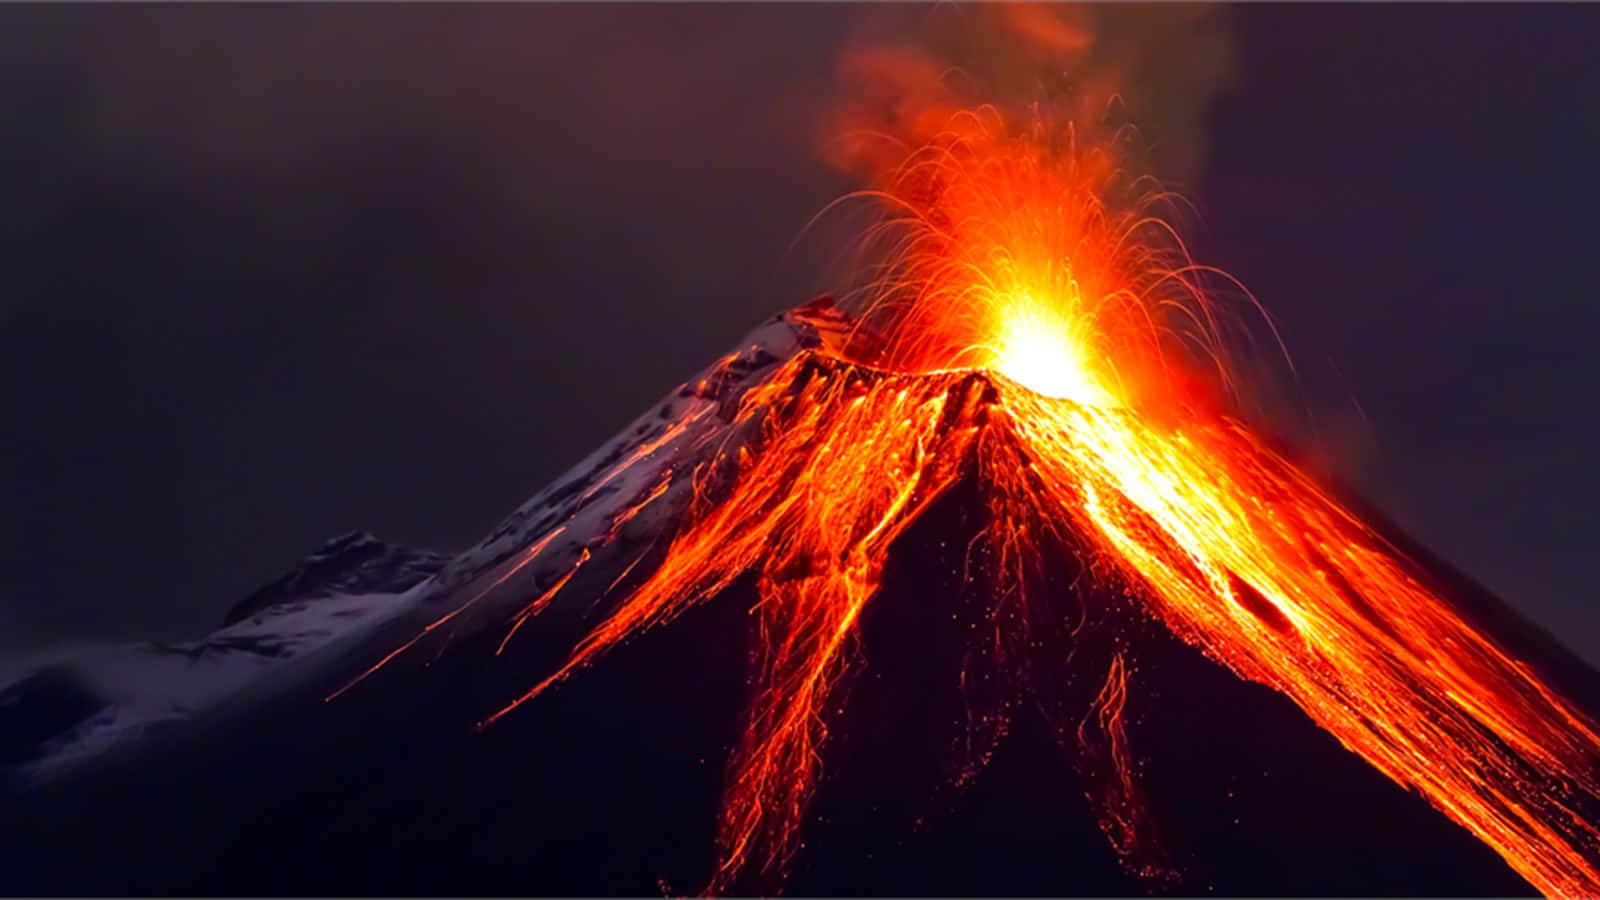 Steam rises from molten lava erupting from the active volcano